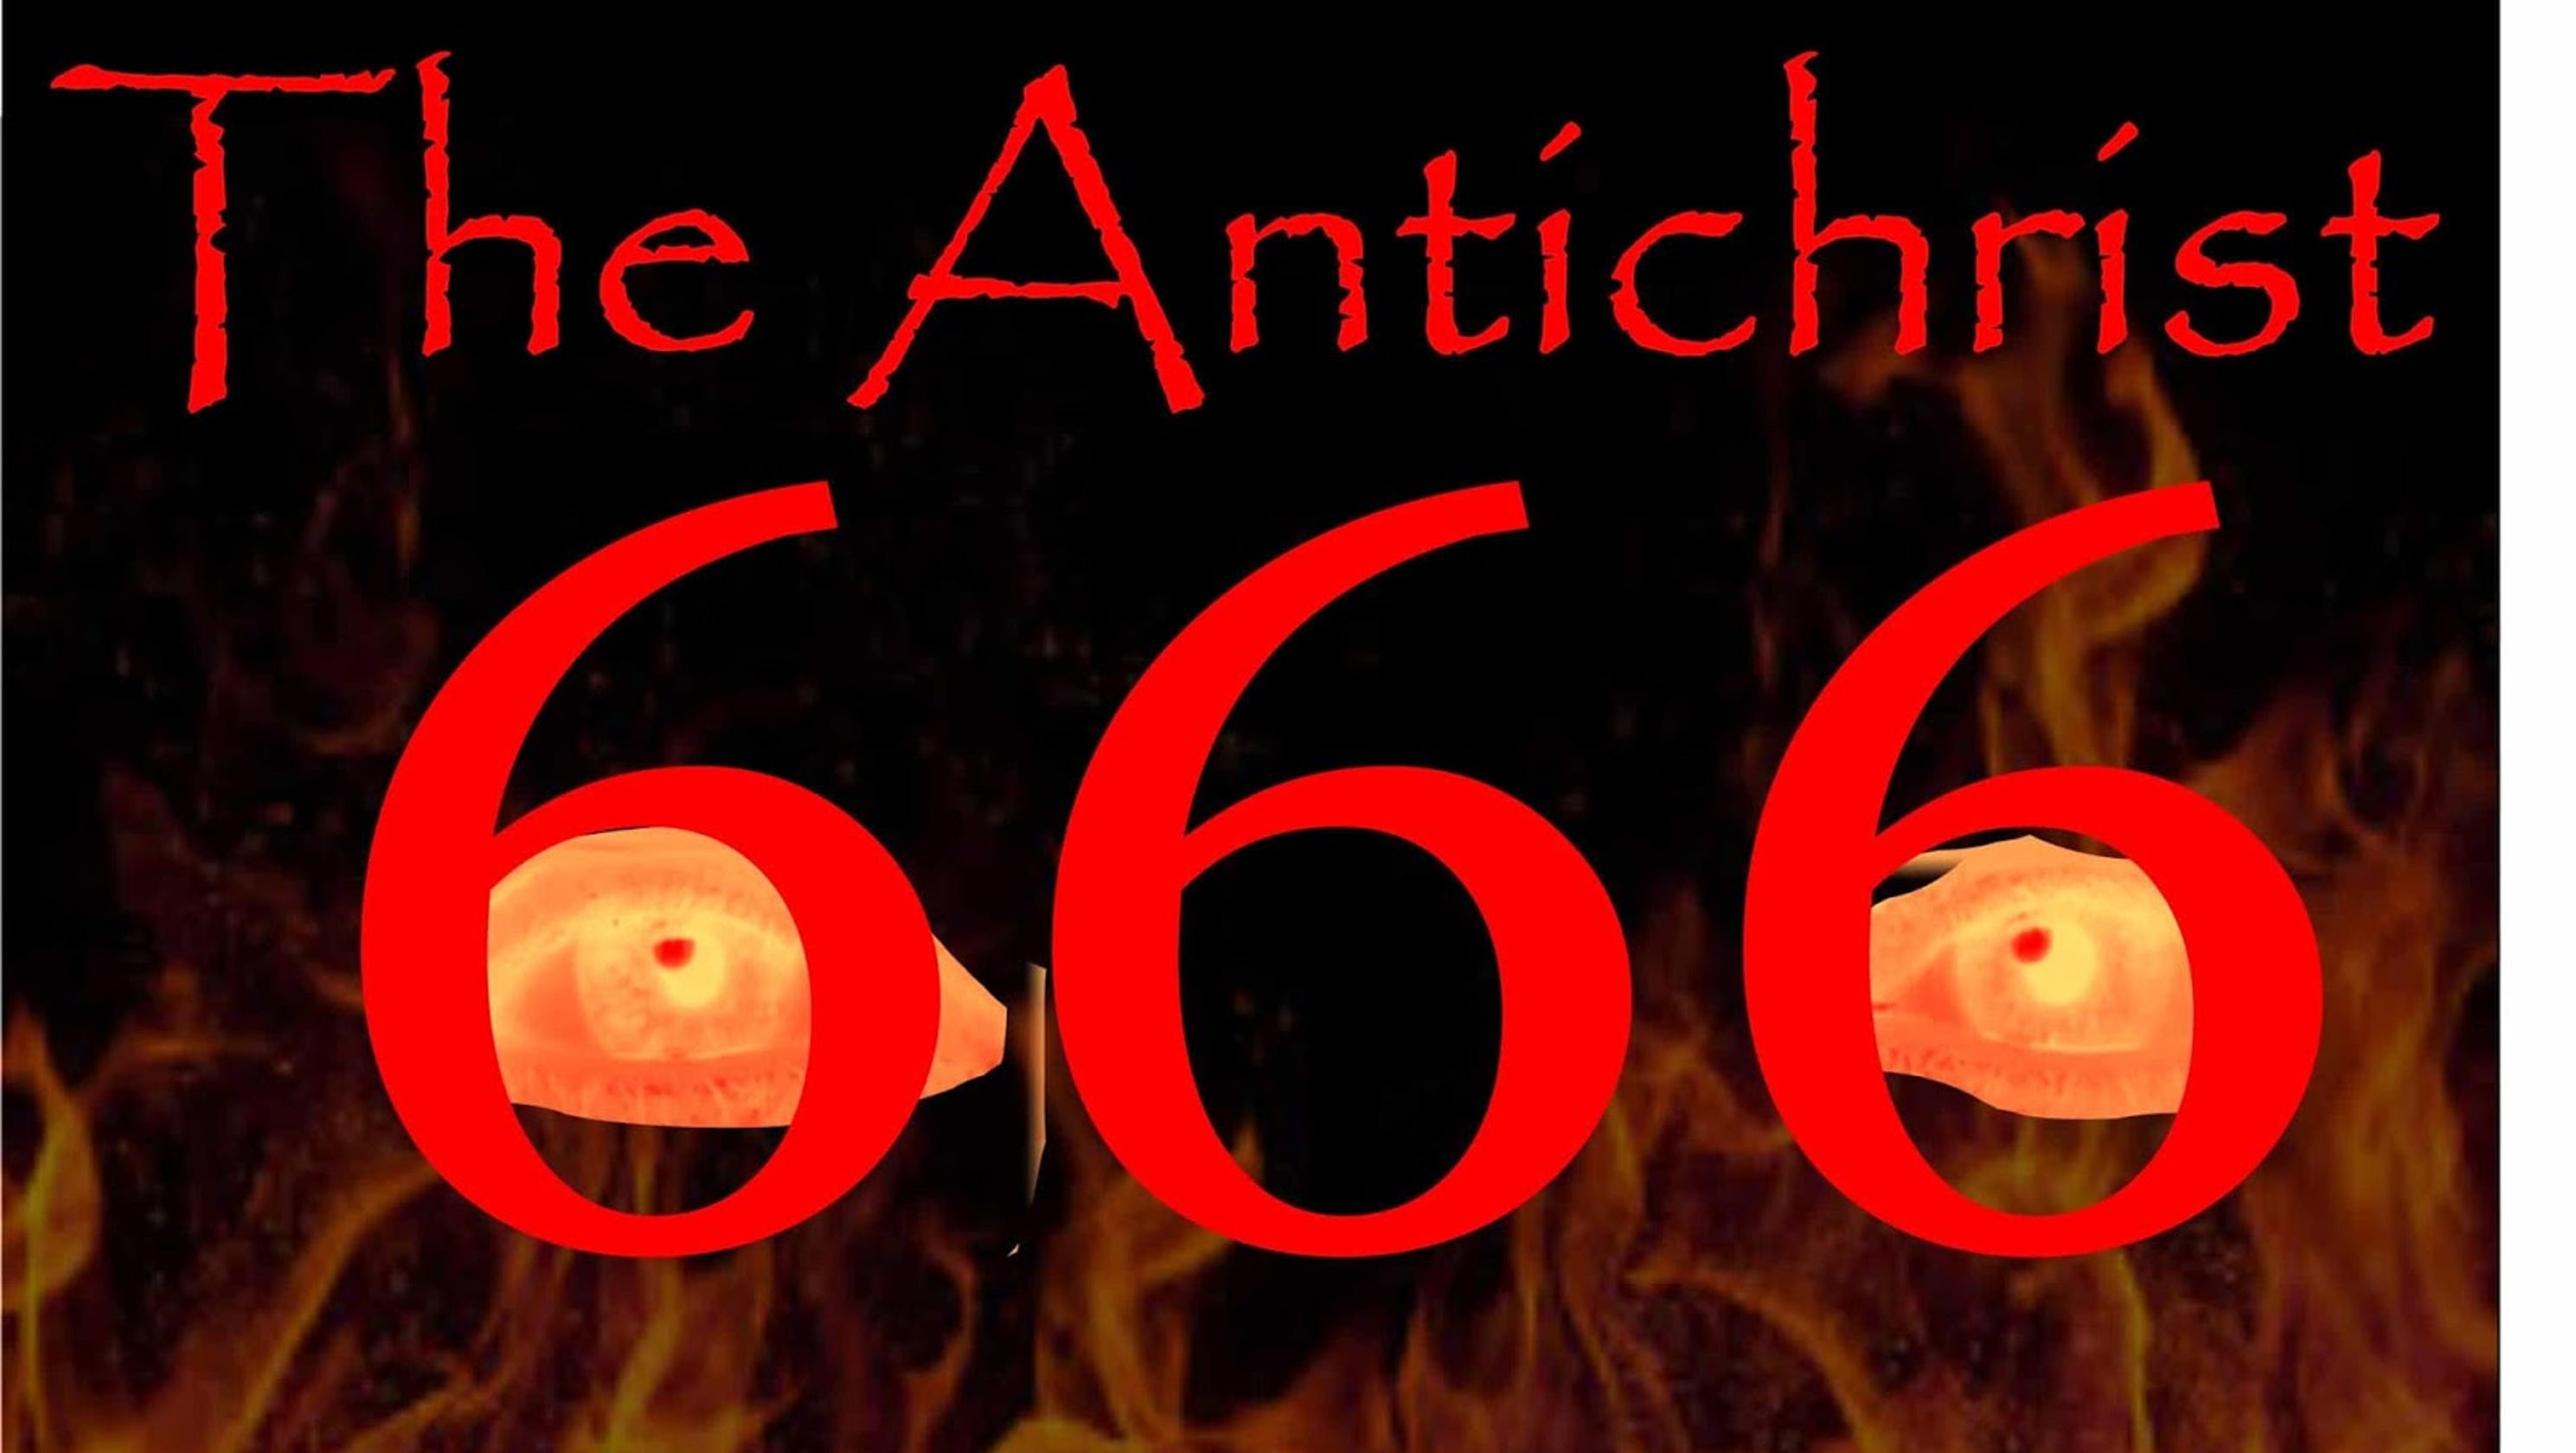 column-no-666-a-number-with-ominous-overtones